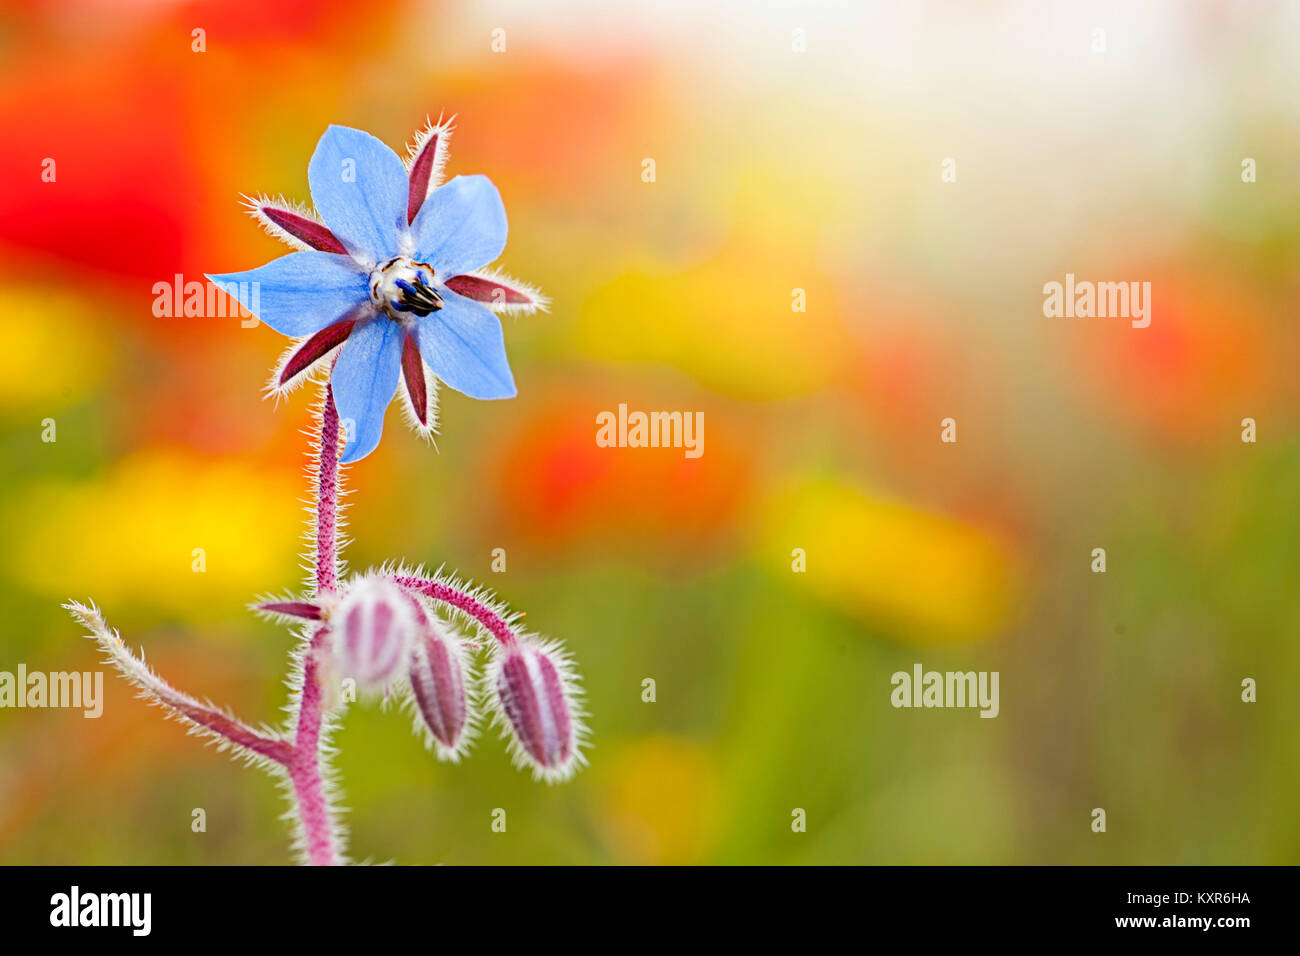 Close-up image of a single blue, summer flowering Borage flower against a colourful background Stock Photo